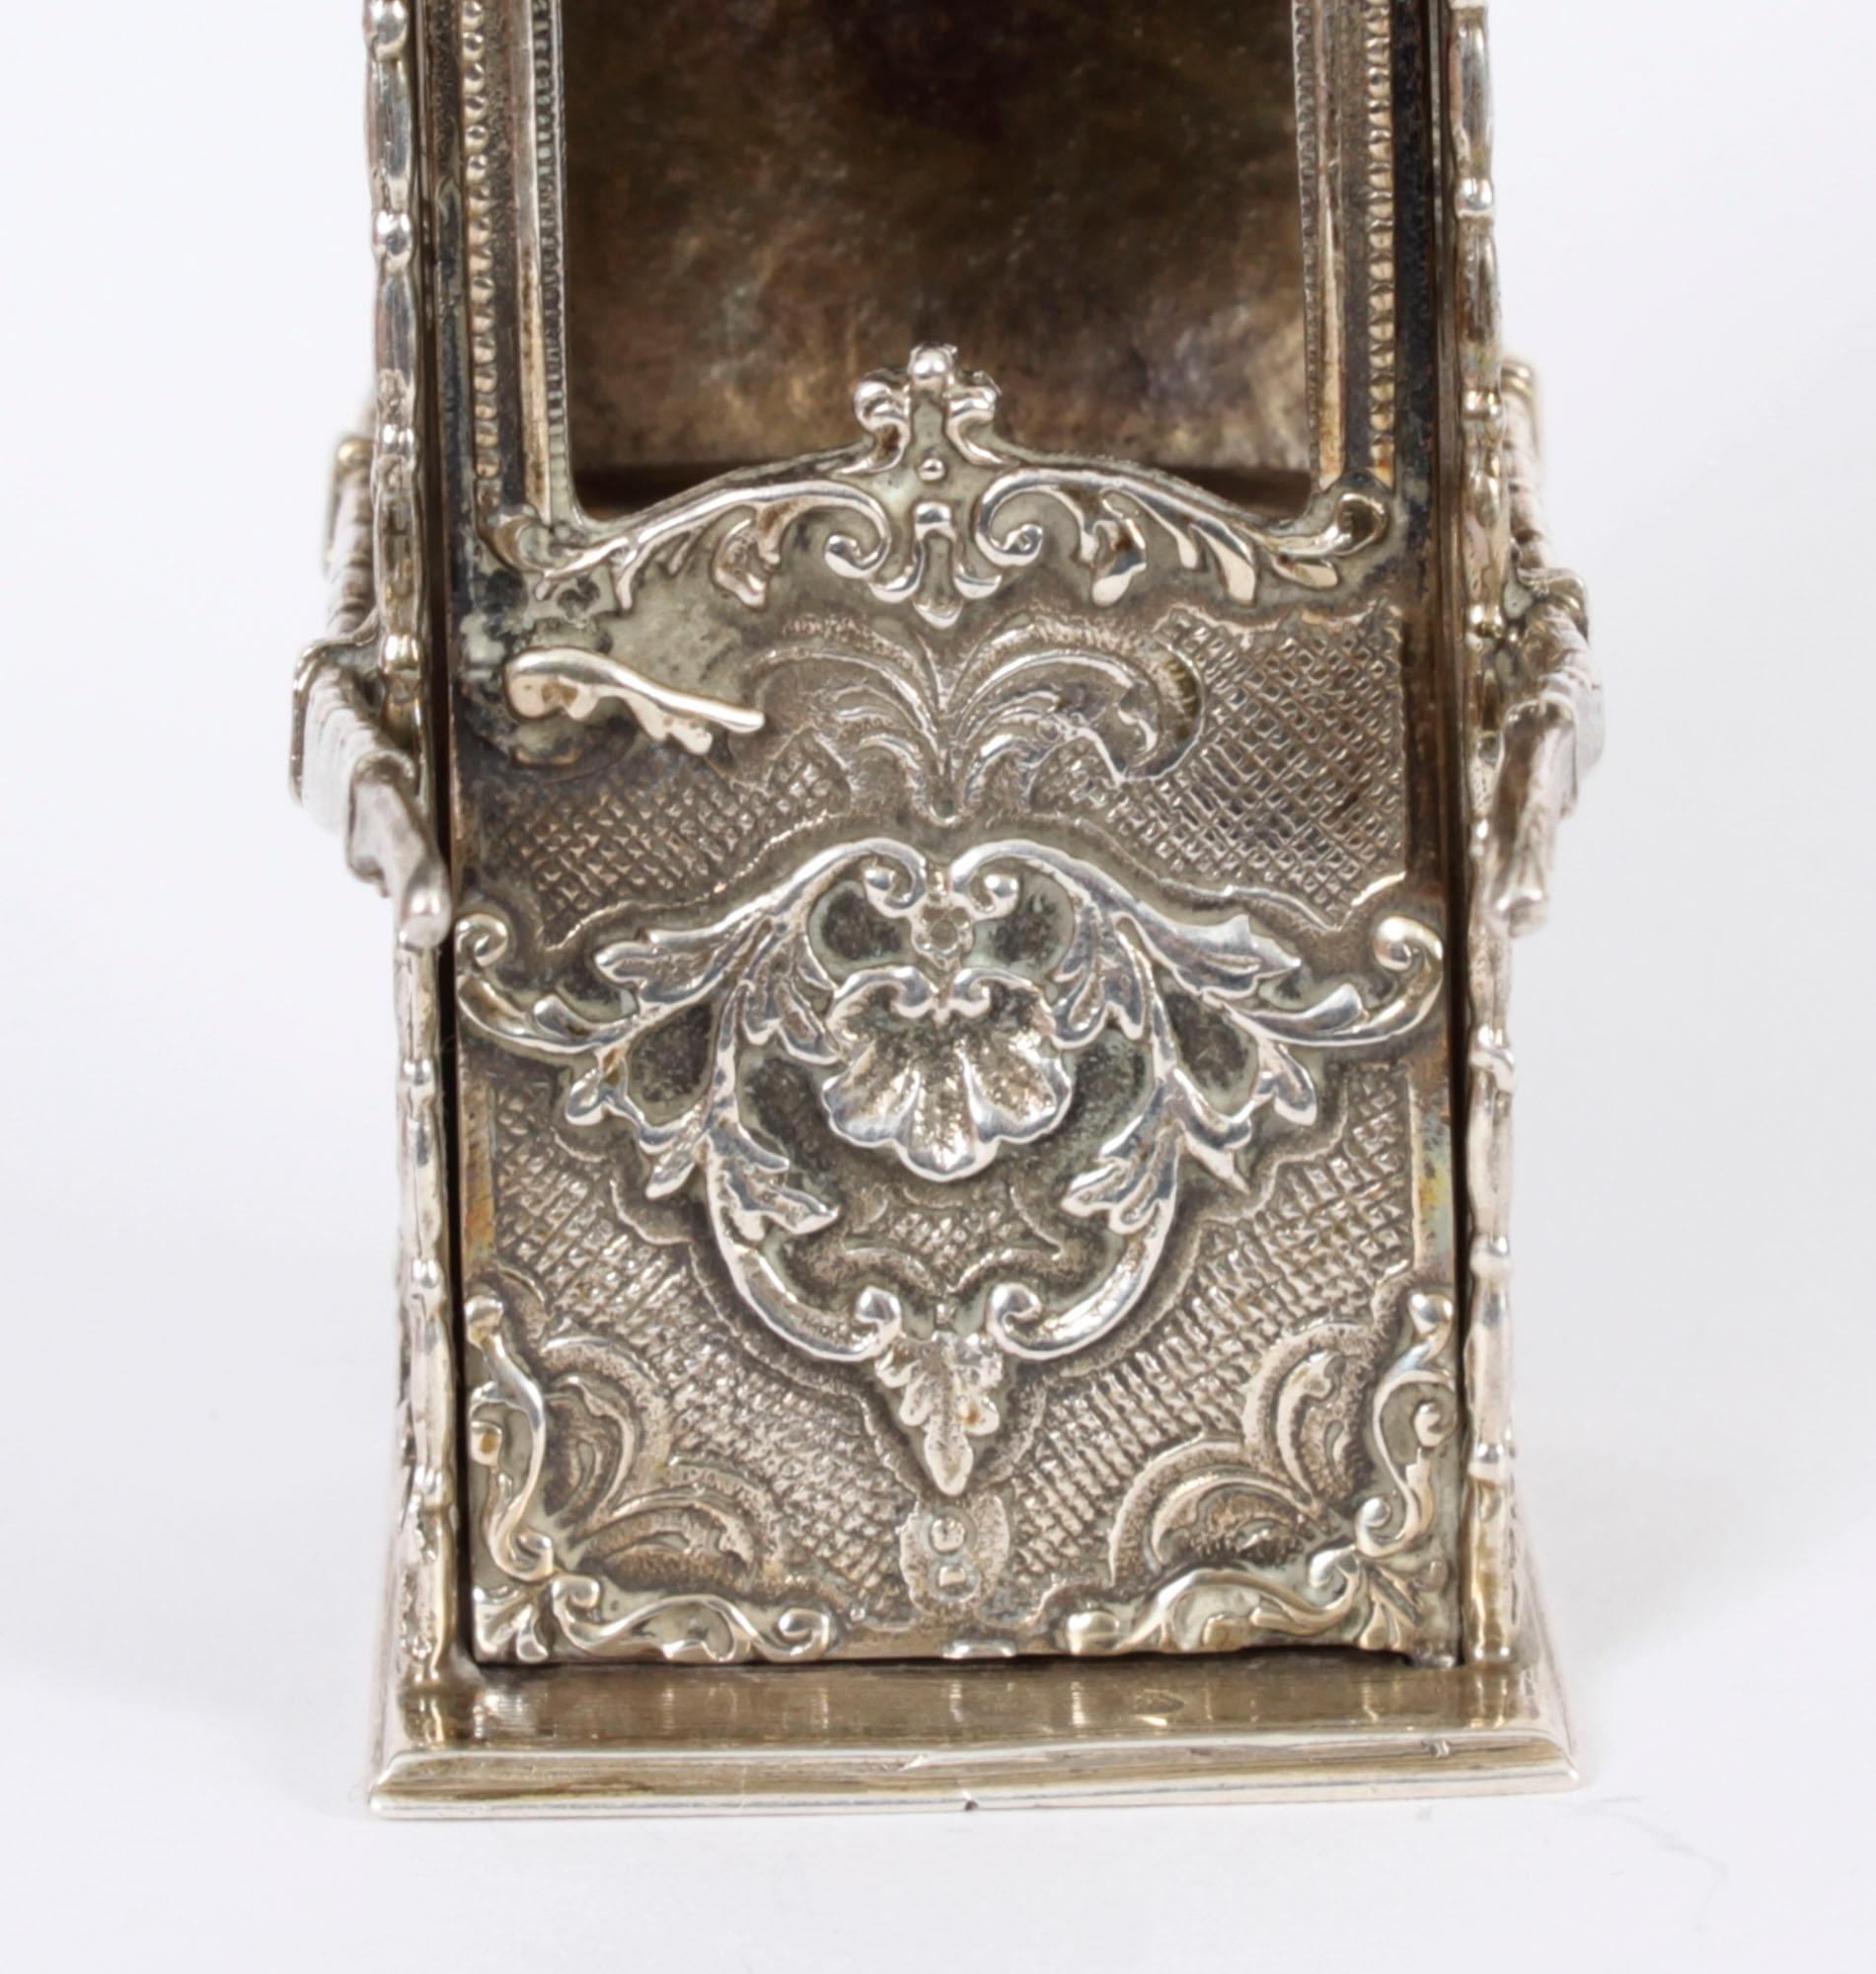 AntiqueFrench Silver Miniature Sedan Chair 19th Century For Sale 5